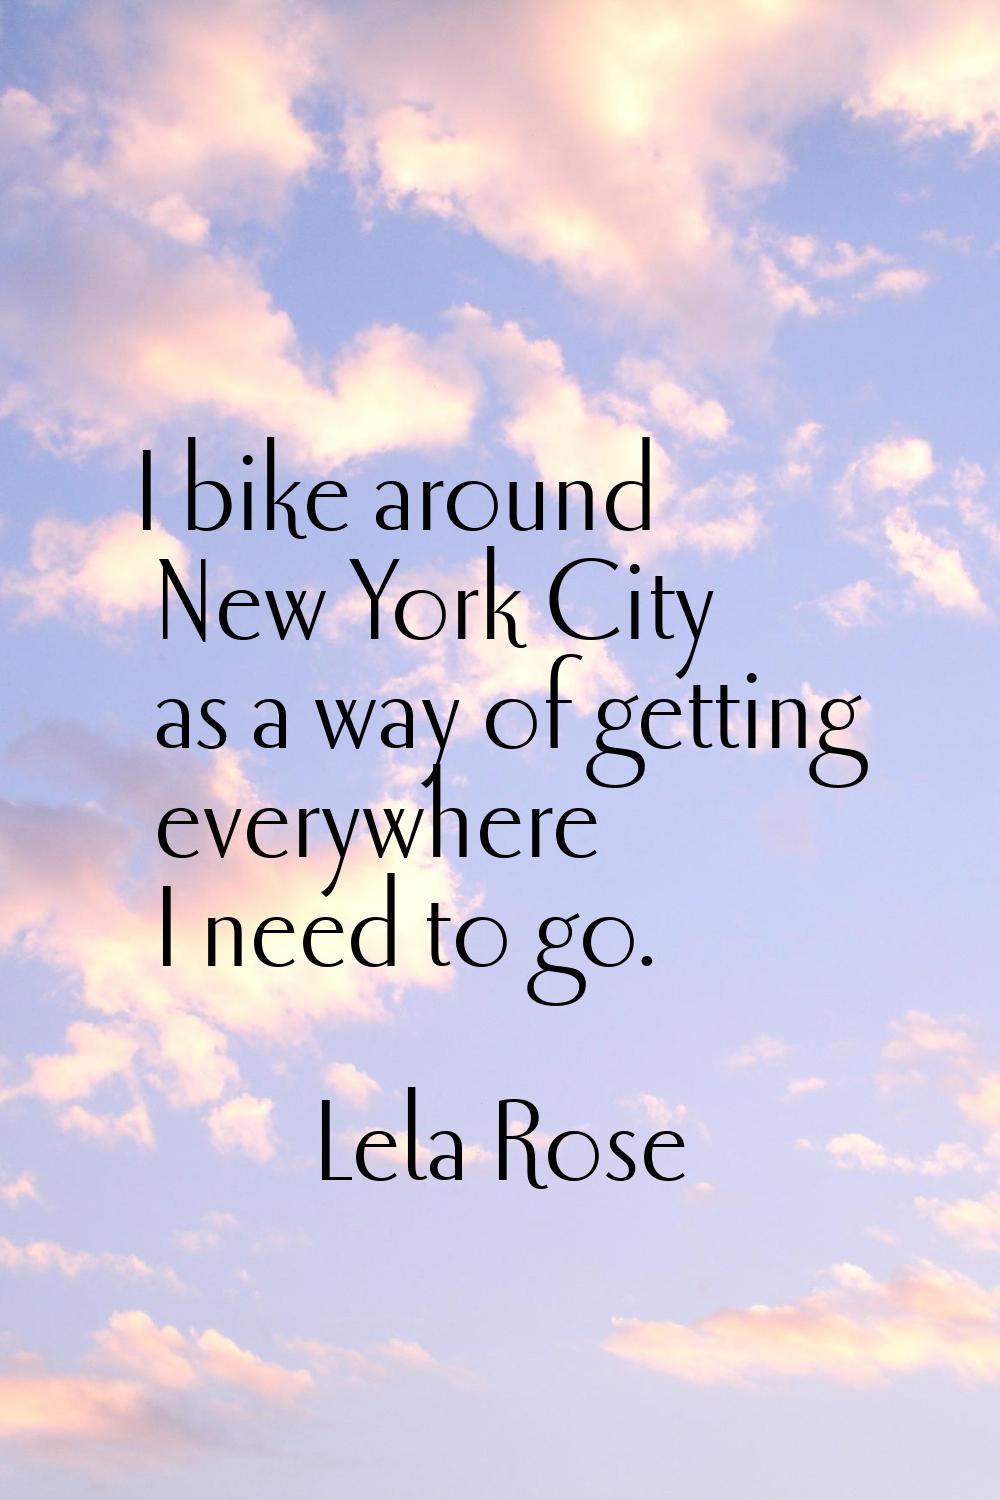 I bike around New York City as a way of getting everywhere I need to go.